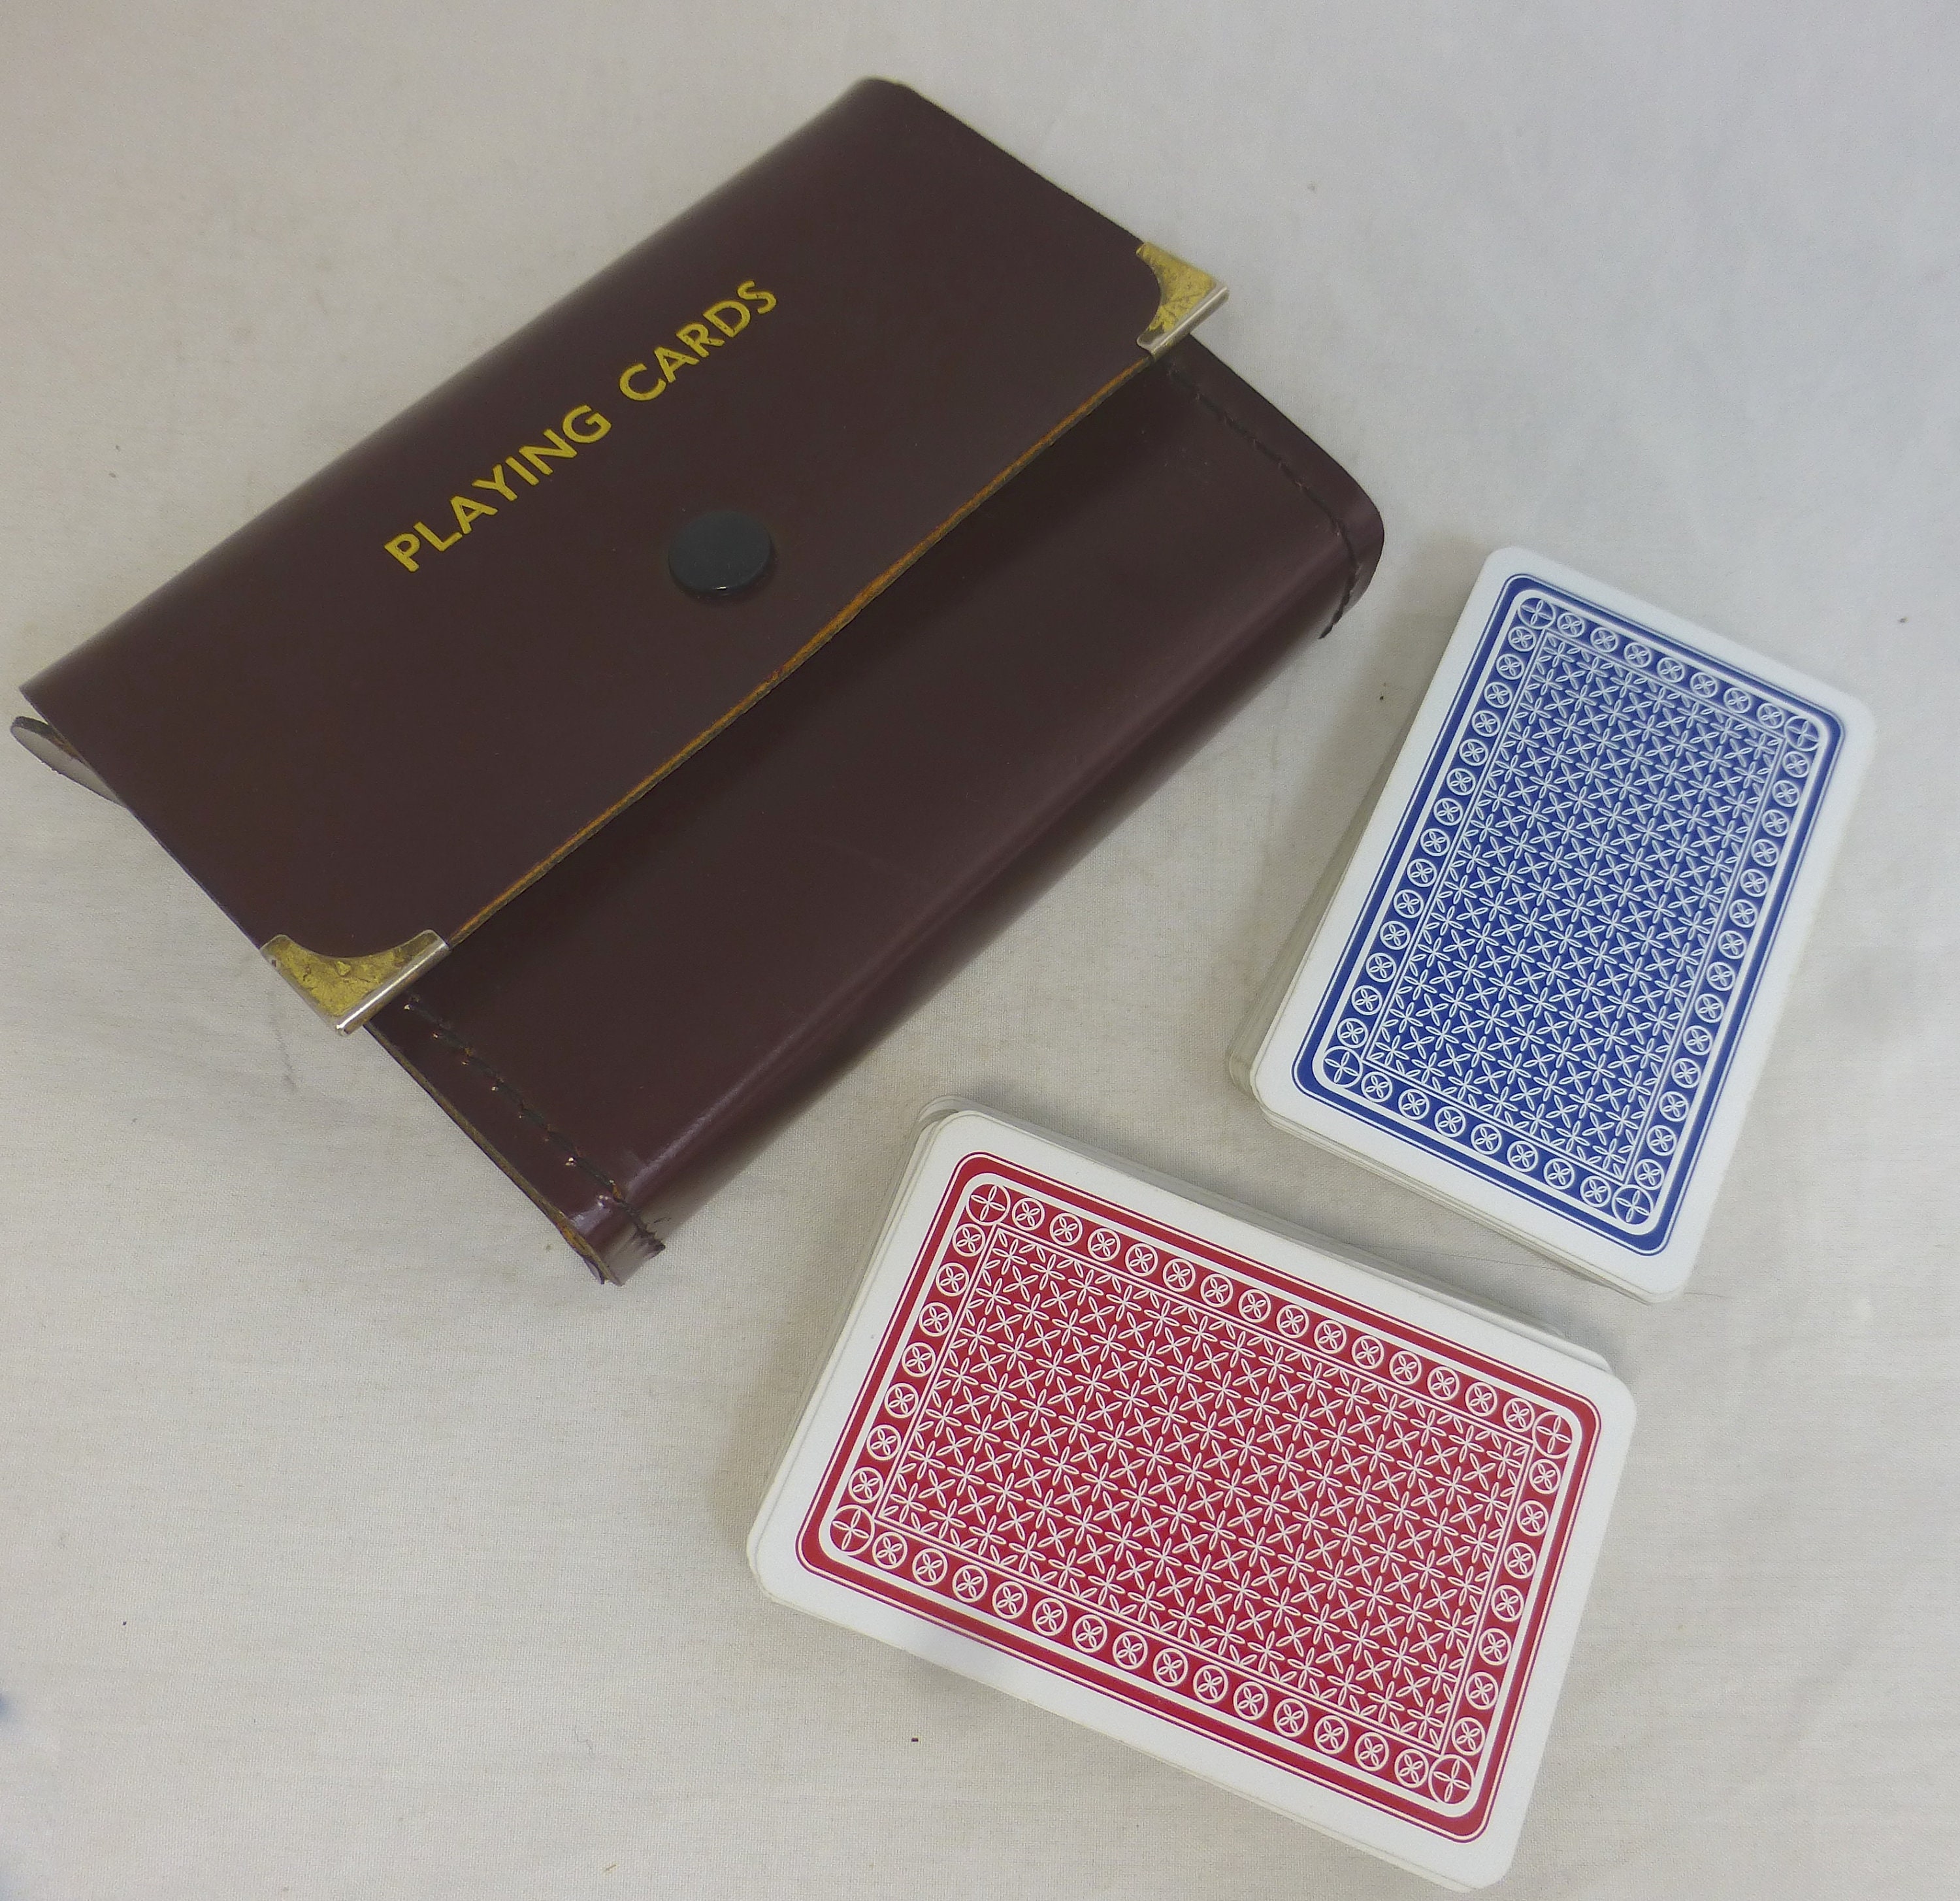 Prada Playing Cards with Leather Case